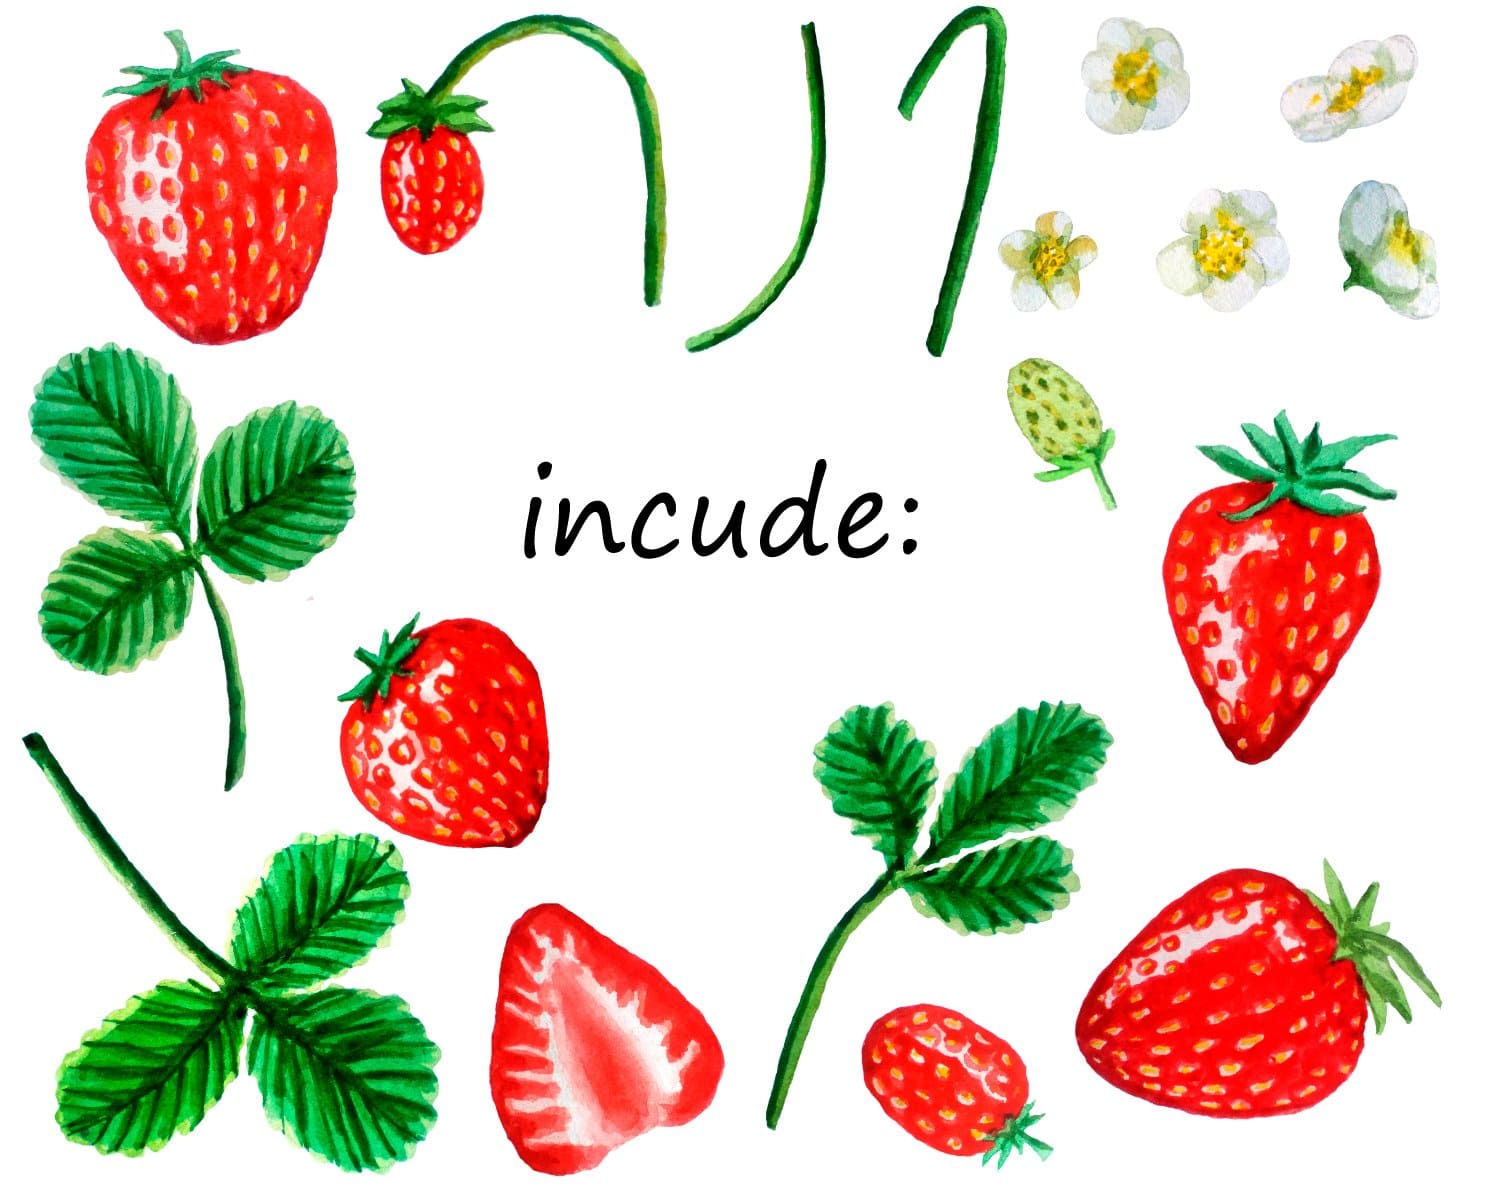 Watercolor strawberry consists of elements: flowers, leaves, ripe and green fruits.